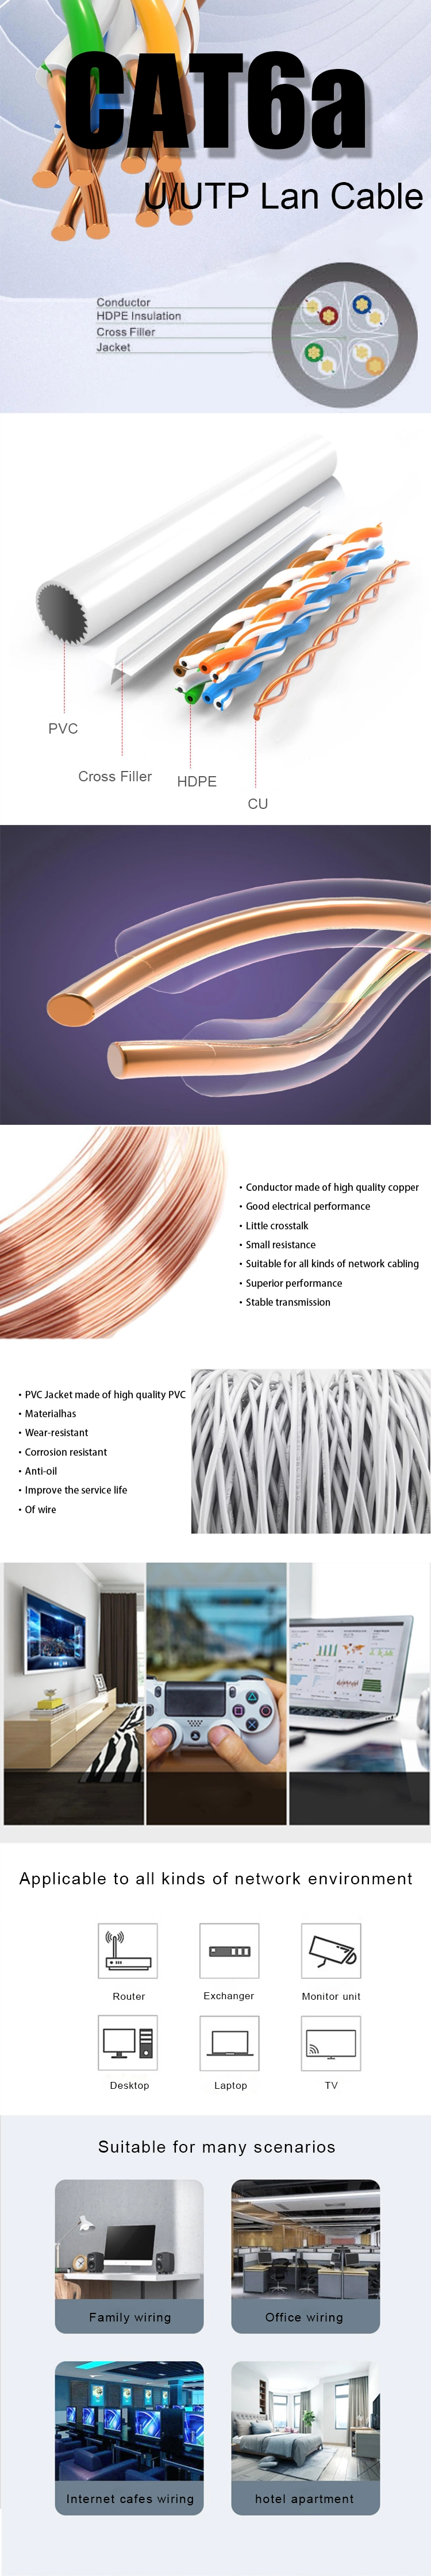 Gcabling Best Network Cable Insulated Communication Cable CAT6, Cat5e UTP Ethernet Network Internet LAN Computer